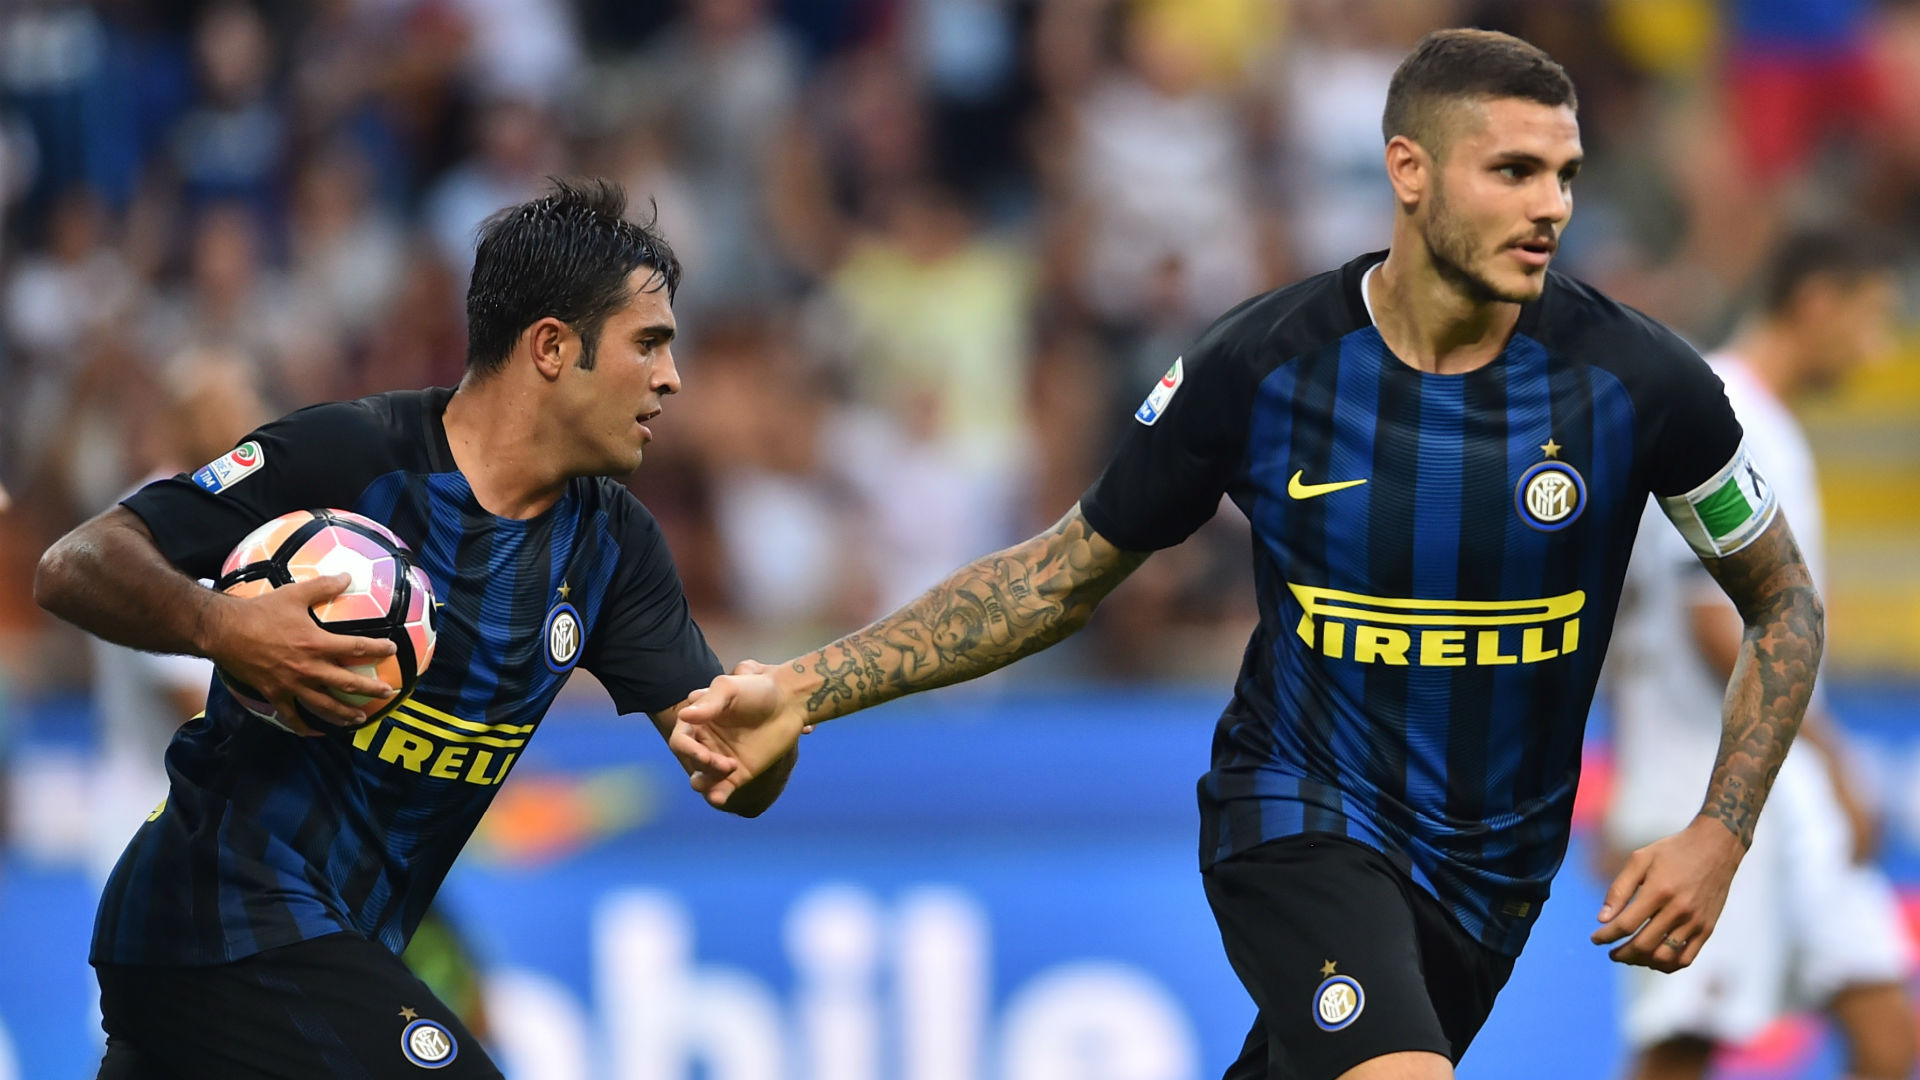 Inter hero Icardi eyes new deal and Serie A title